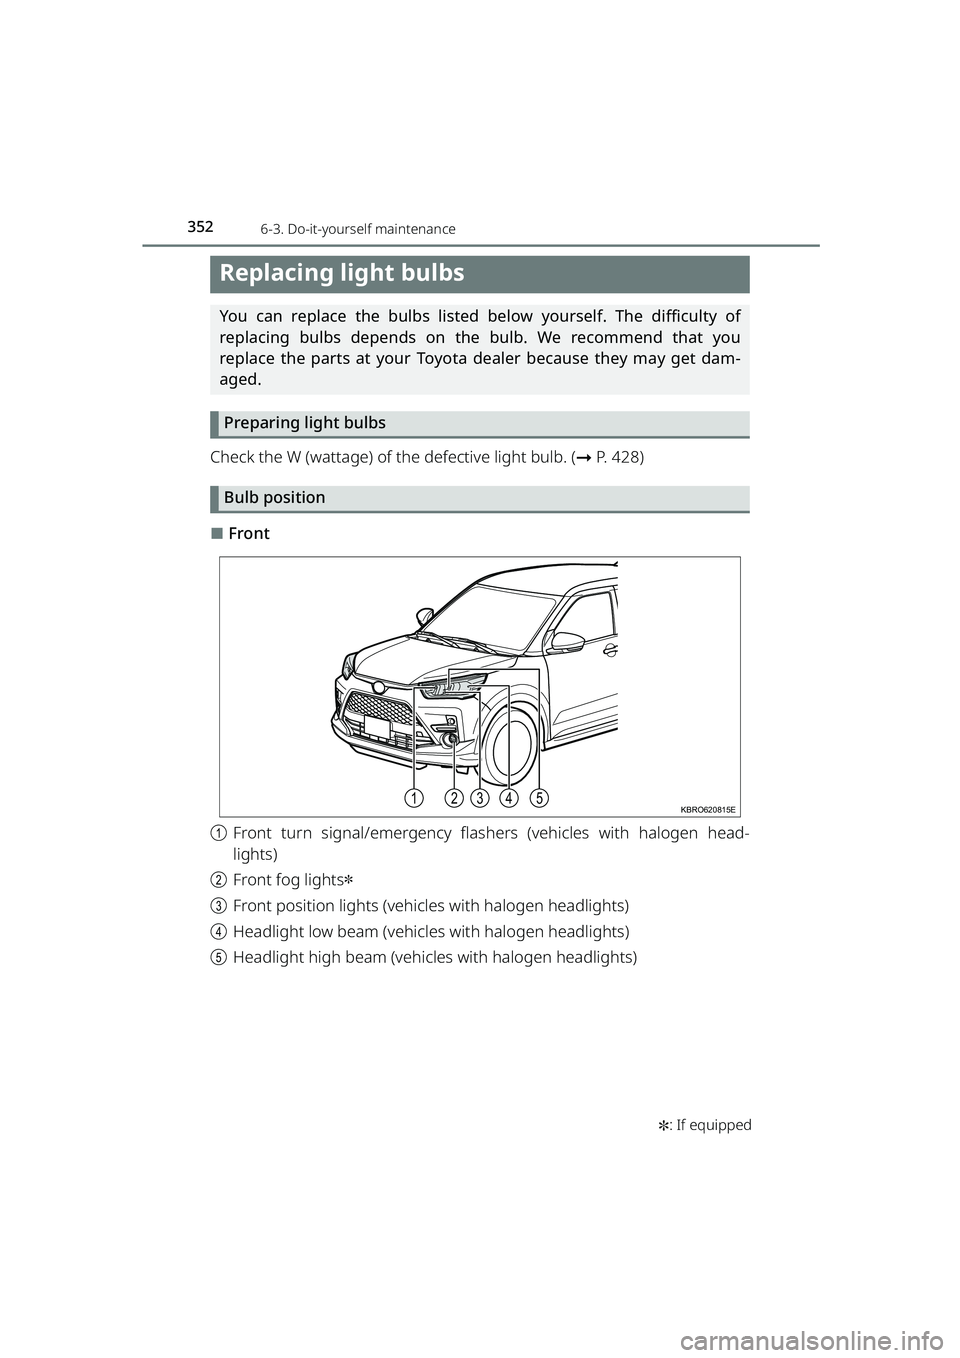 TOYOTA RAIZE 2023  Owners Manual 3526-3. Do-it-yourself maintenance
RAIZE_OM_General_BZ358E✽
: If equipped
Replacing light bulbs
You can replace the bulbs listed below yourself. The difficulty of
replacing bulbs depends on the bulb